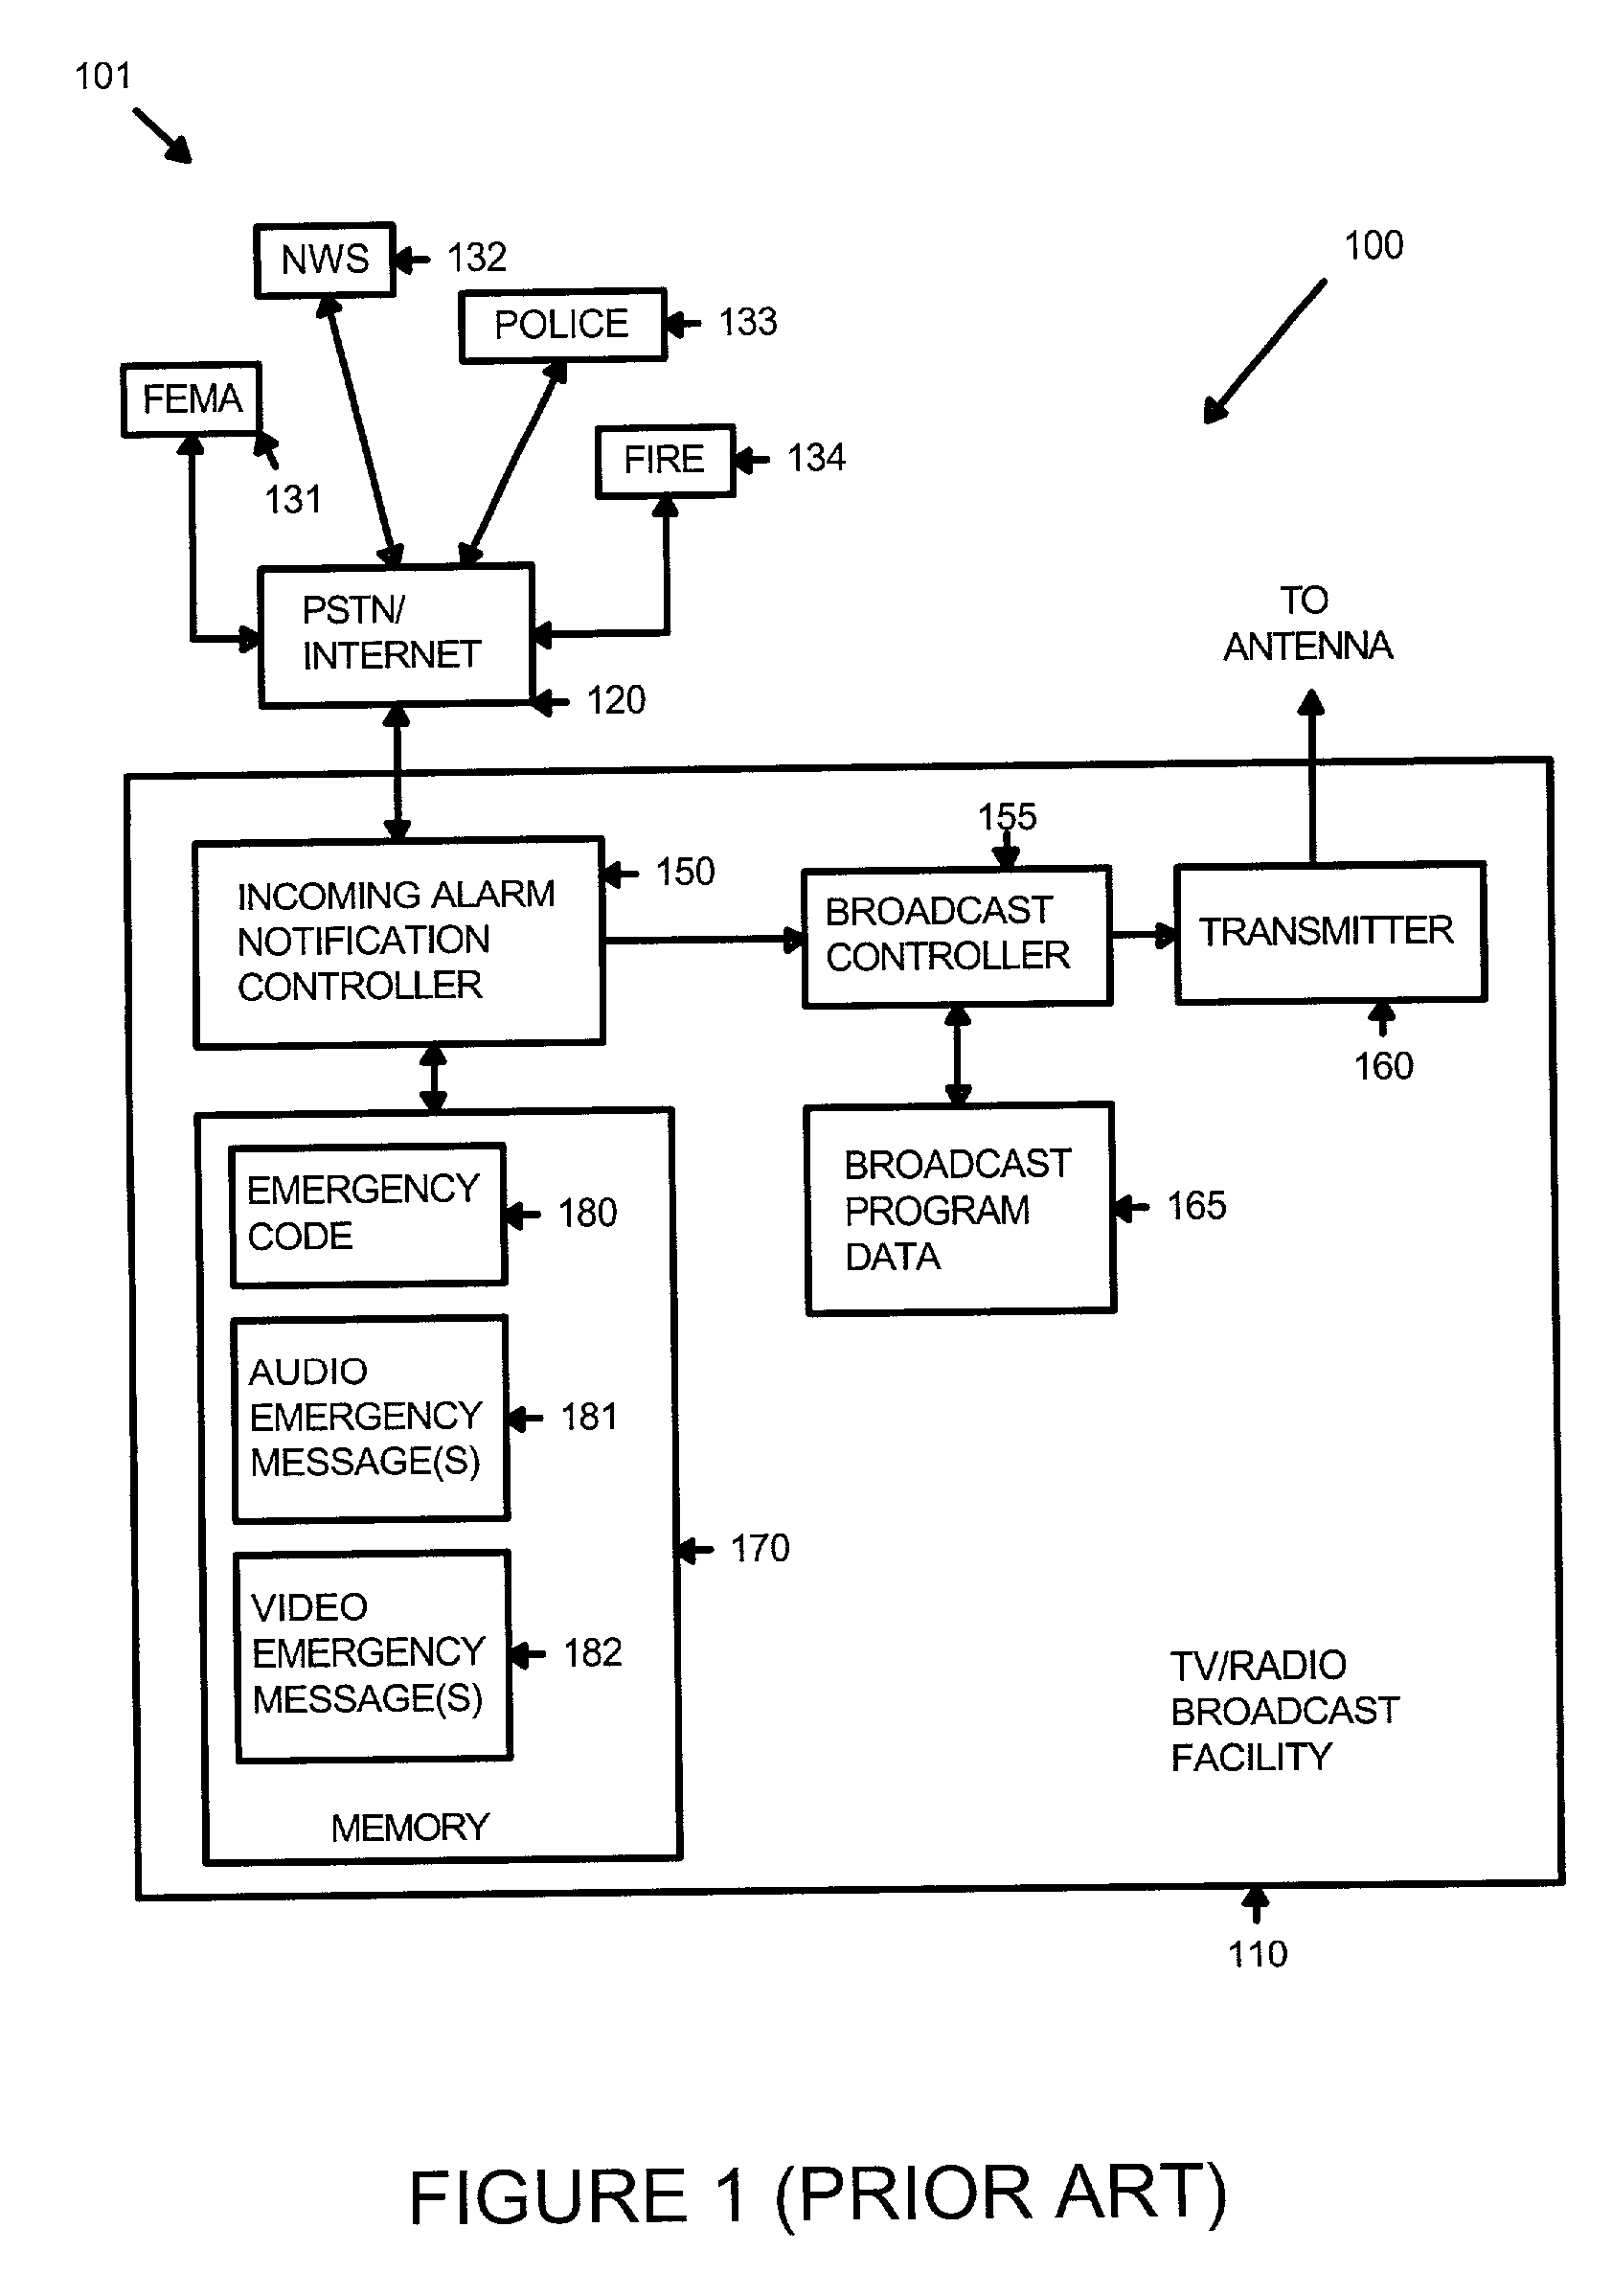 Systems for monitoring broadcast content and generating notification signals as a function of subscriber profiles and methods of operating the same